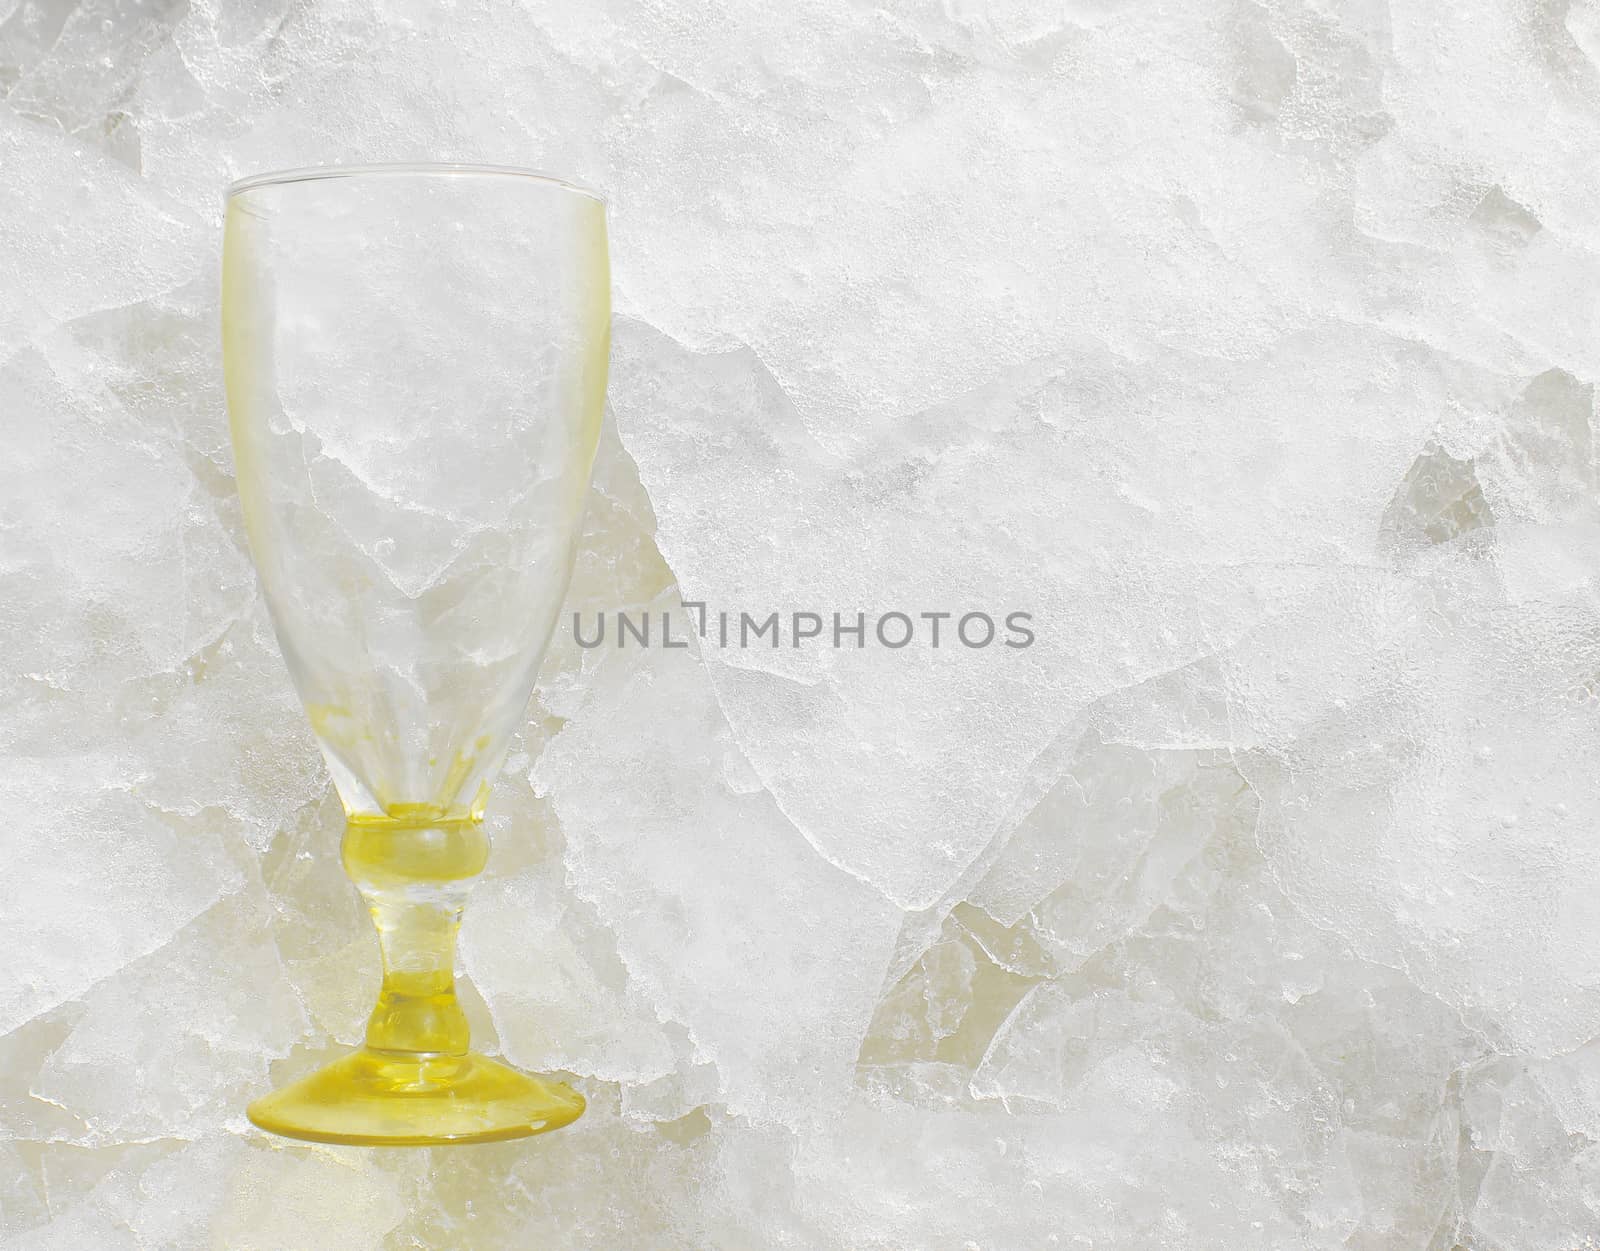 Still life with an empty wine glass lying on slabs or shard of thin ice, with copyspace. Ideal for bar and drink related advertisements or for brochures and even bar menu background.
